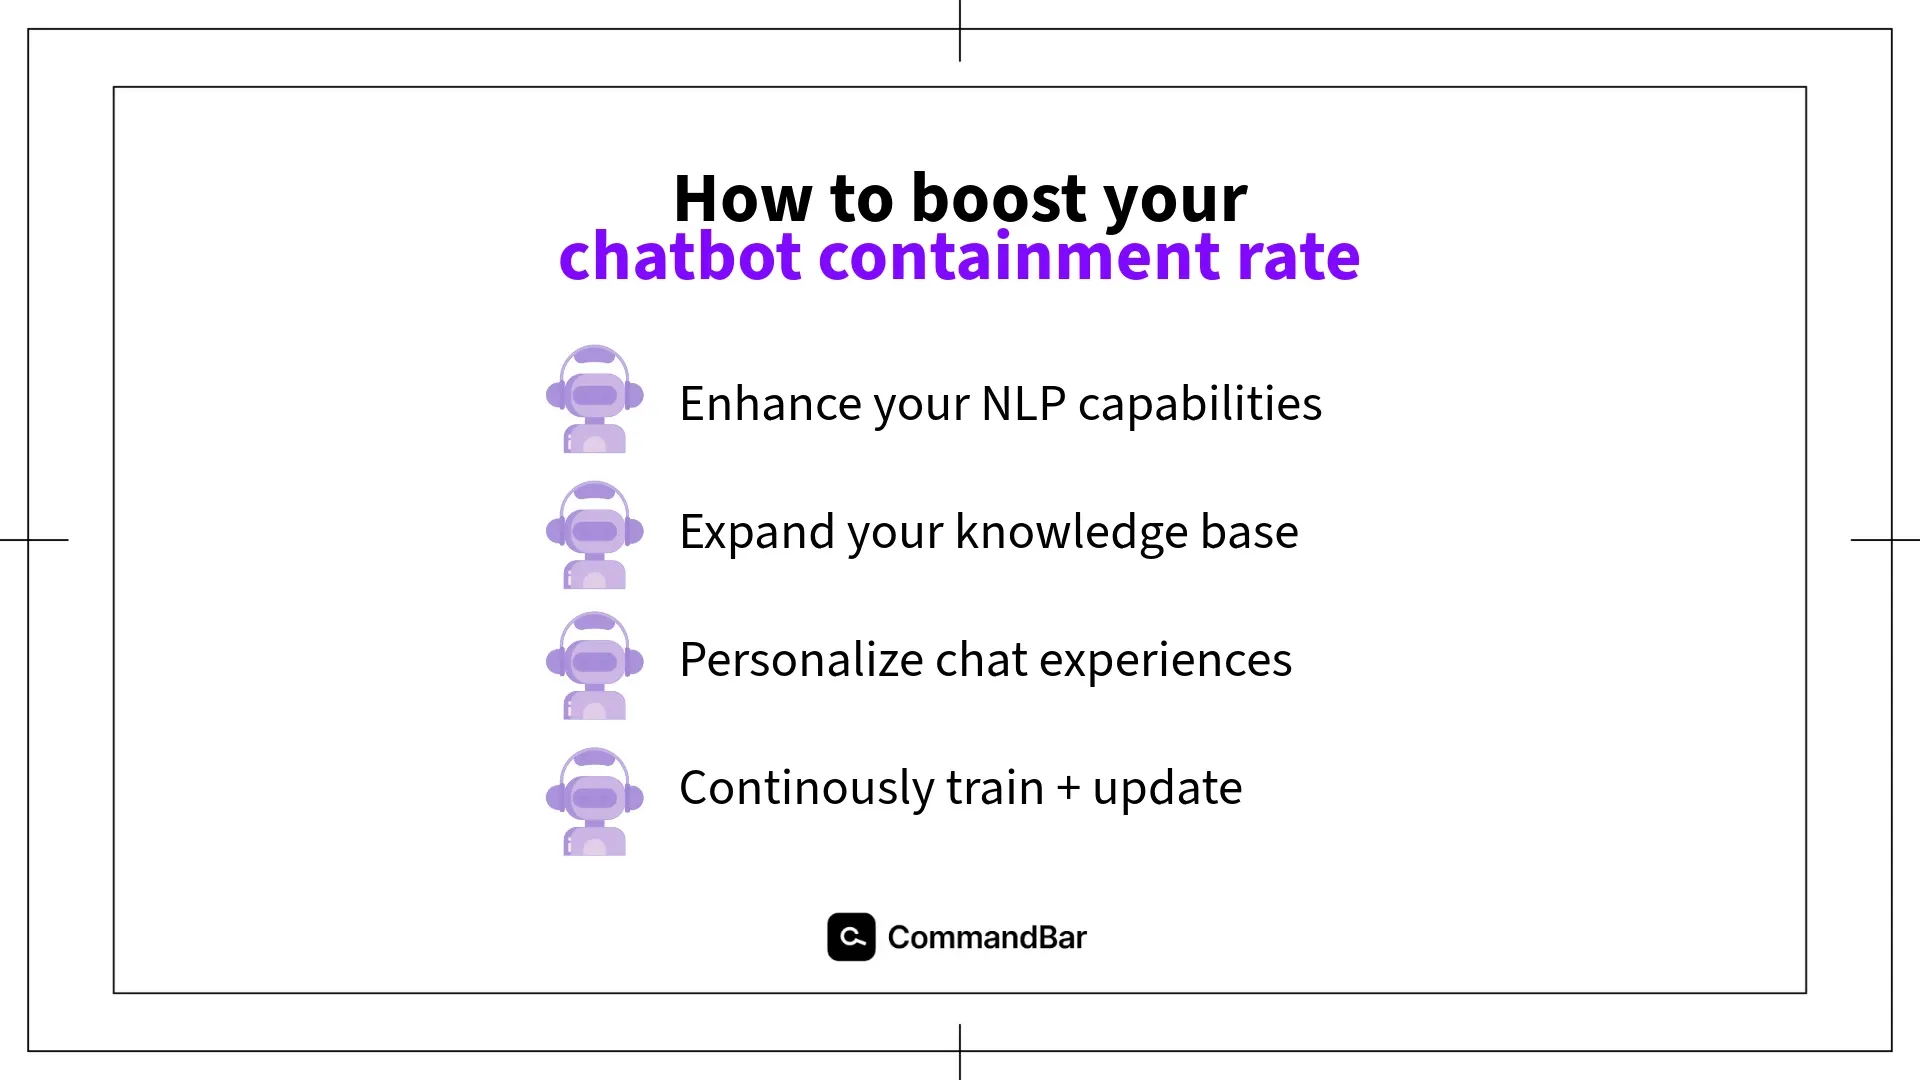 tips to boost your chatbot containment rate